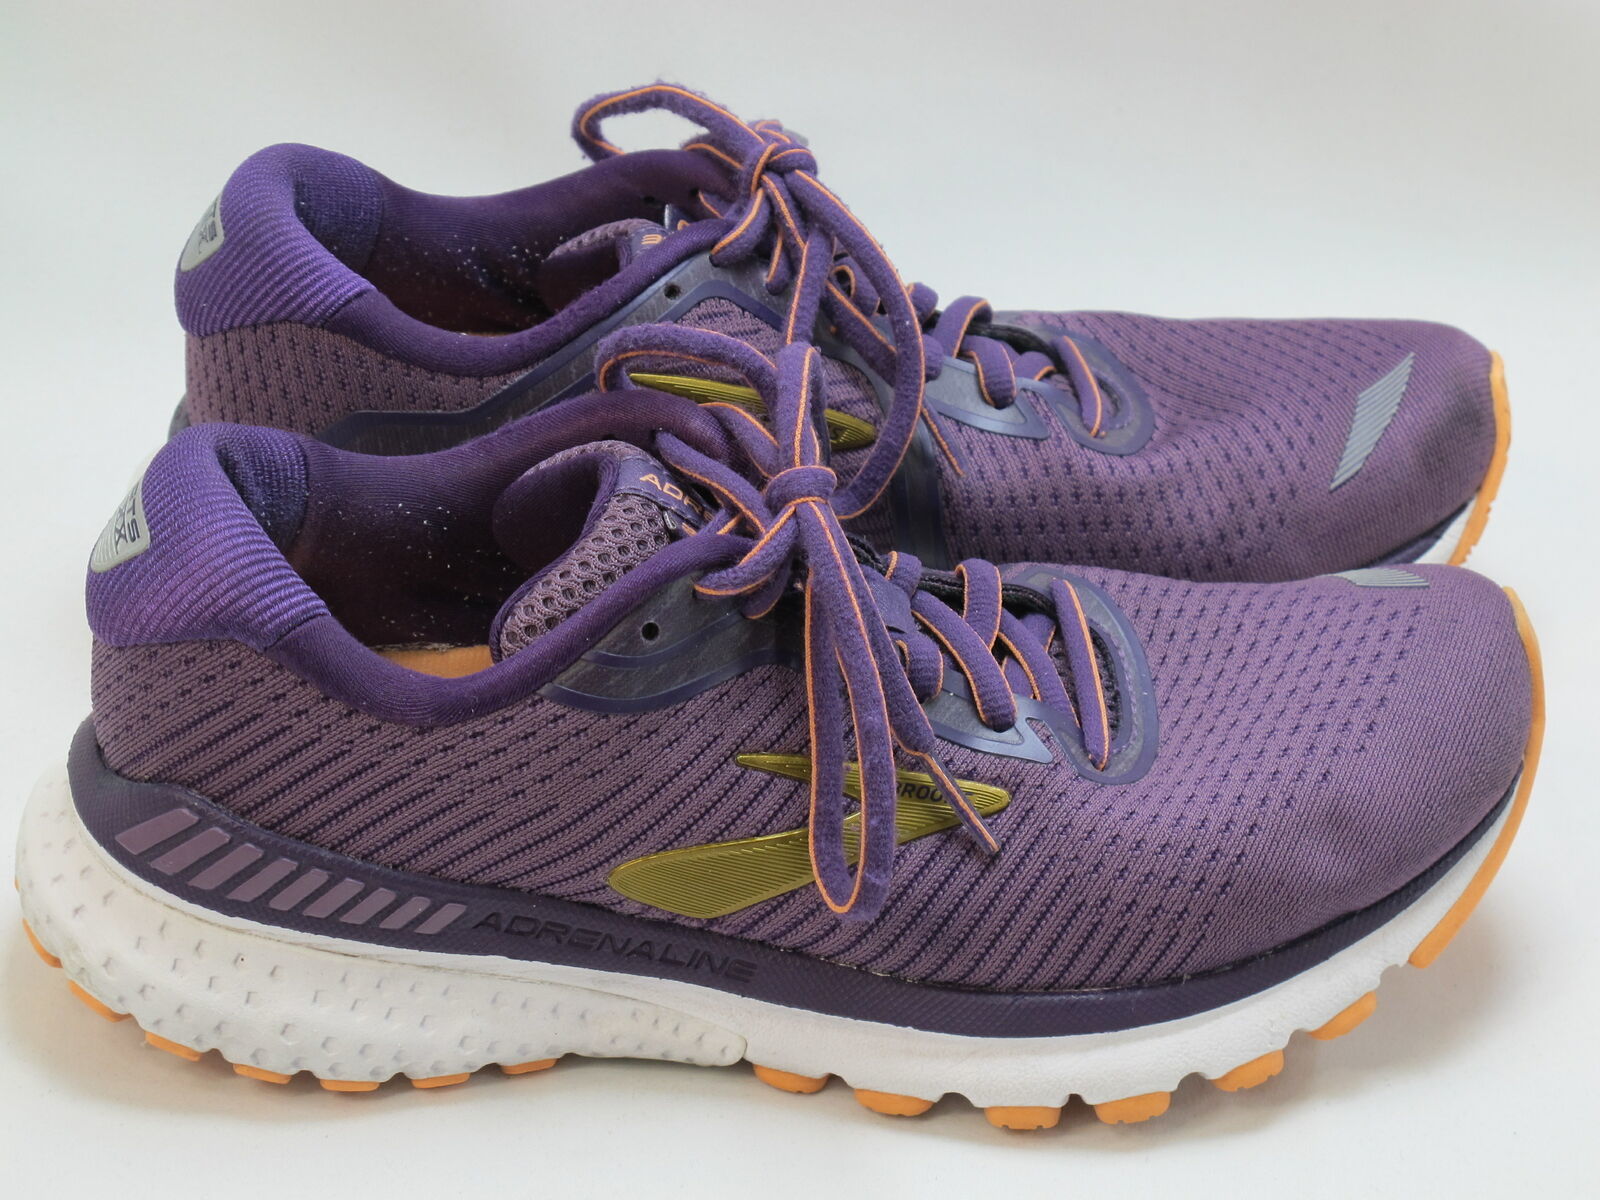 Primary image for Brooks Adrenaline GTS 20 Running Shoes Women’s Size 7.5 B US Excellent Plus @@